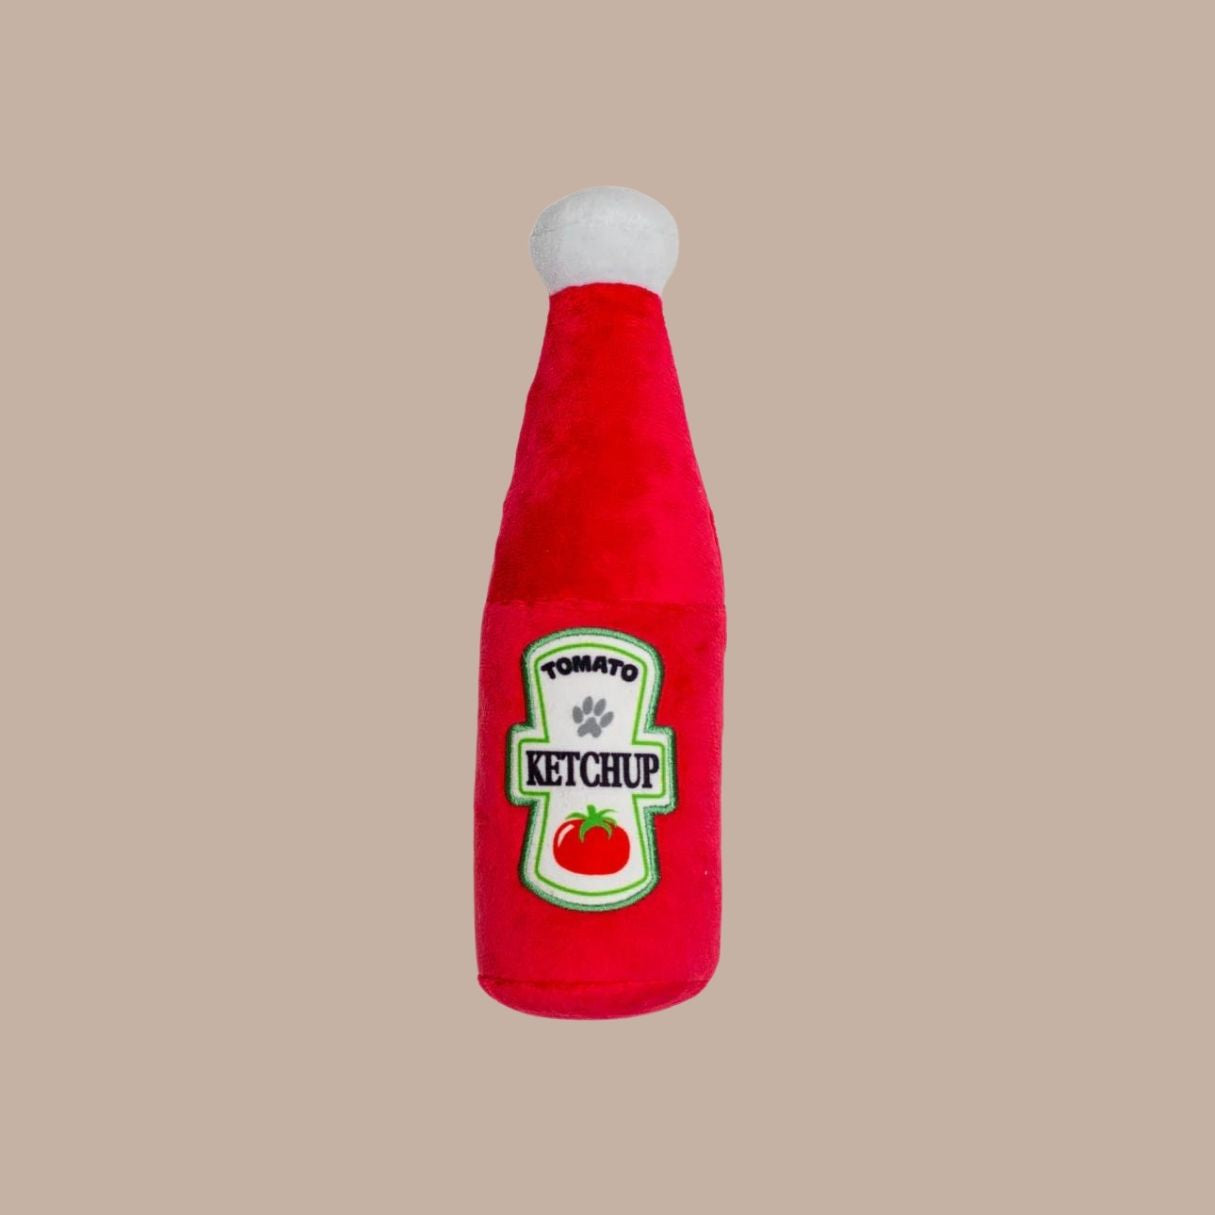 Ketchup Bottle Dog Toy - Toni Unleashed - Box Builder Item - KINSHIP GIFT - Dogs, Ketchup, LDT:GW:RESTRICT, Pets, pittsburgh food & drink, toni unleashed - Pittsburgh - gift - boxes - gift - baskets - corporate - gifts - holiday - gifts